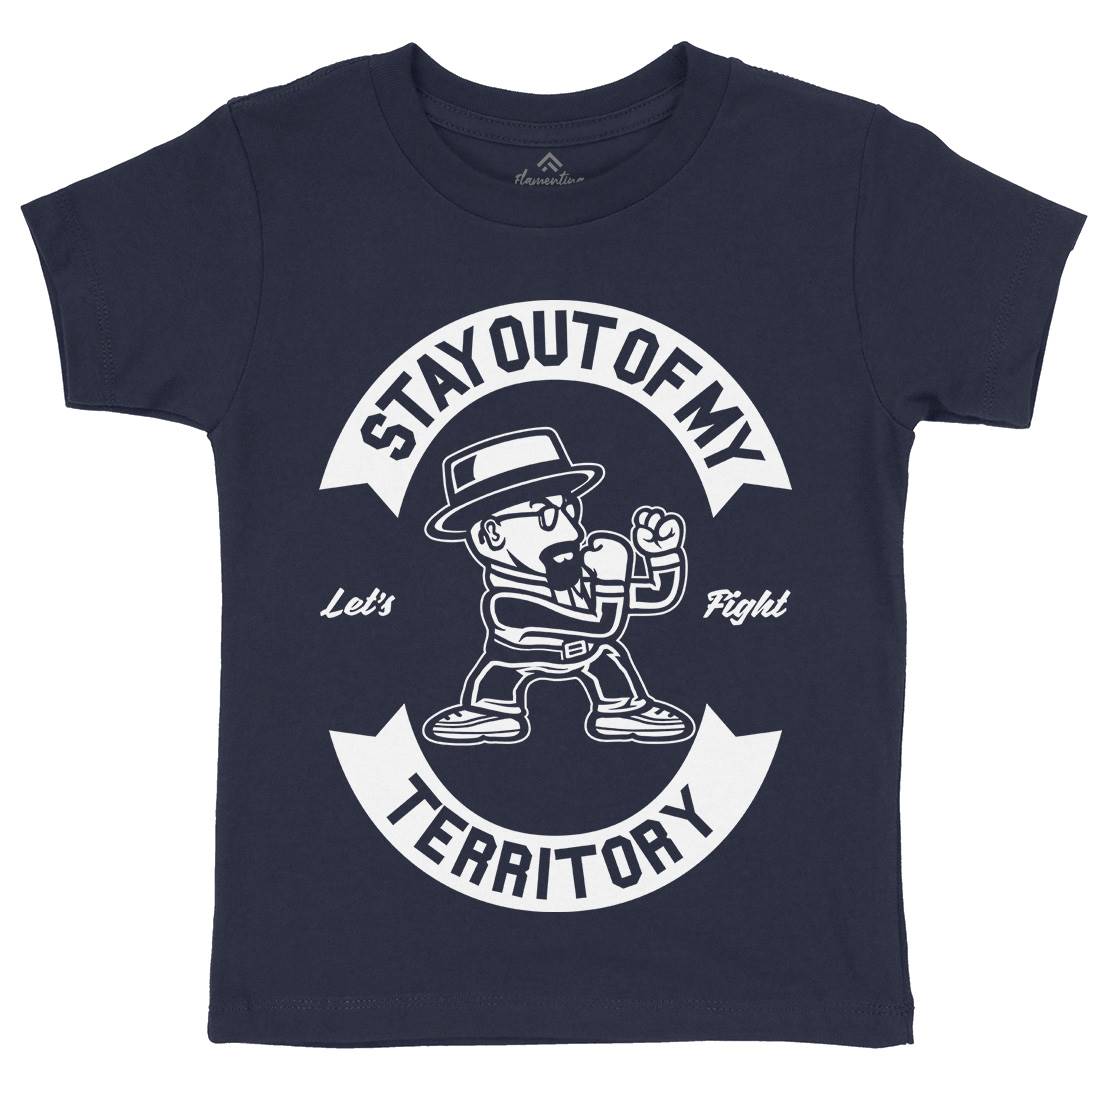 Stay Out Kids Organic Crew Neck T-Shirt Retro A284